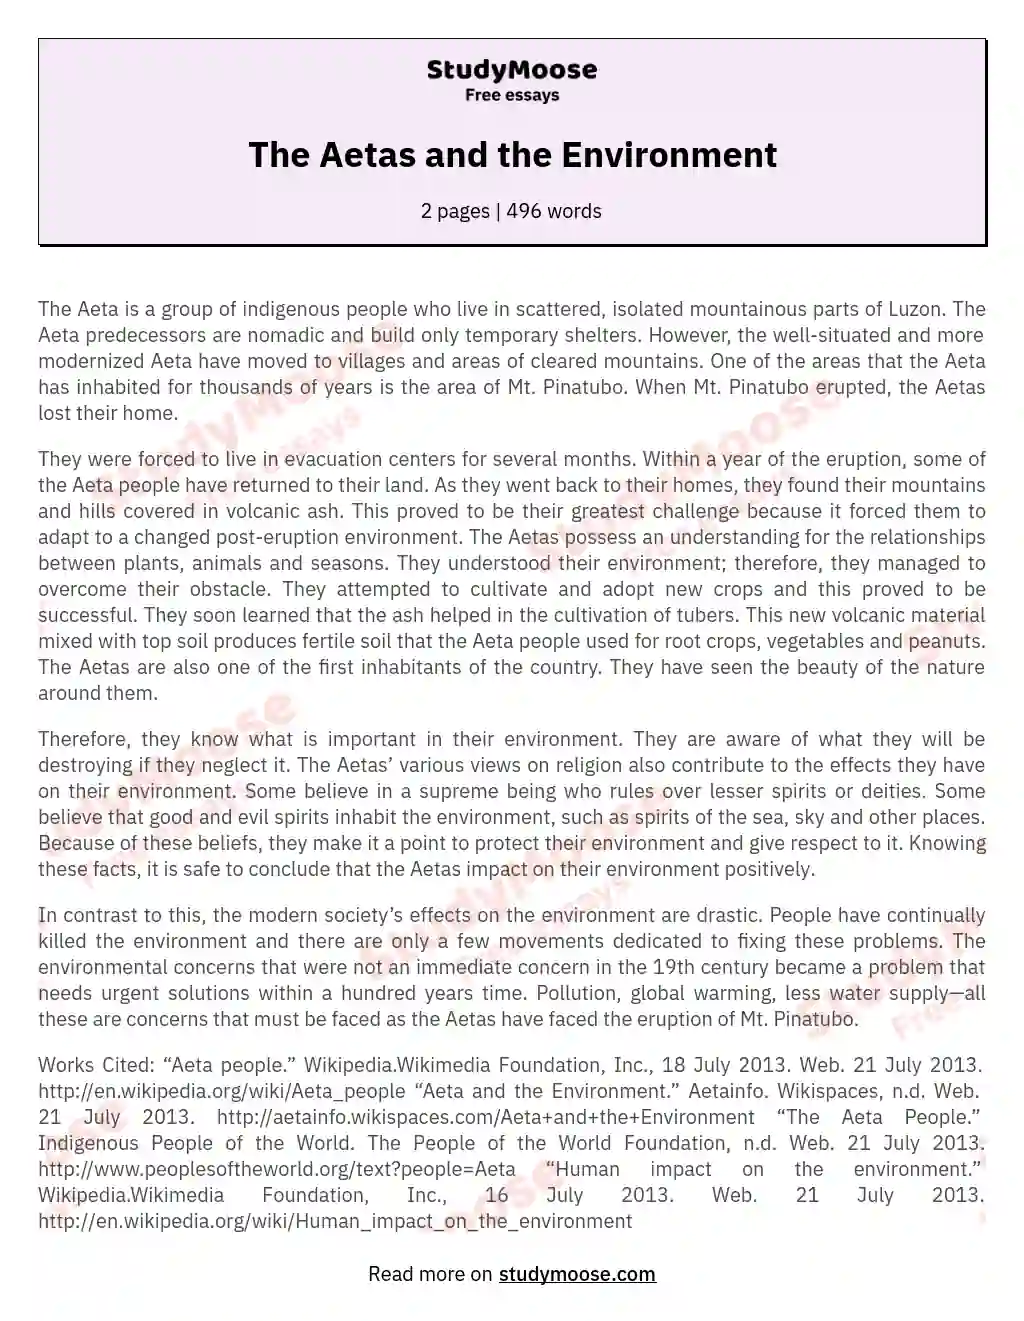 The Aeta People: Guardians of the Environment essay